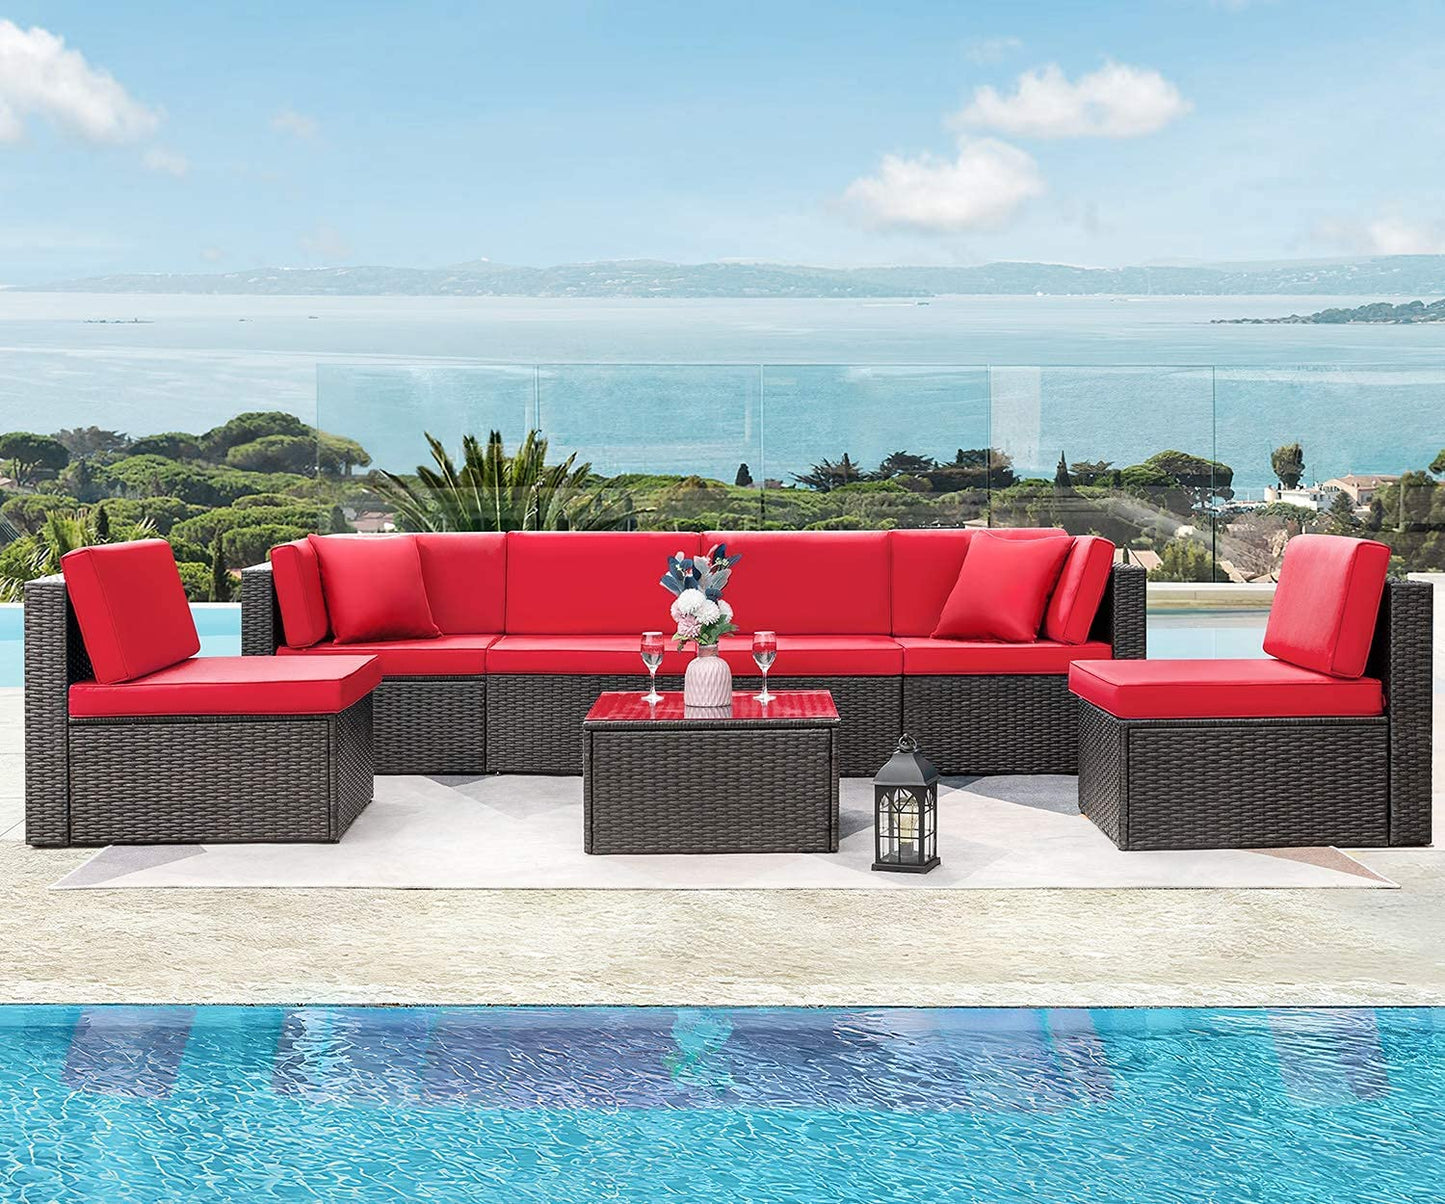 Patio Watcher 7 Pieces Outdoor Sectional Sofa Patio Furniture Sets Manual Weaving Wicker Rattan Patio Conversation Sets with Cushion and Glass Table